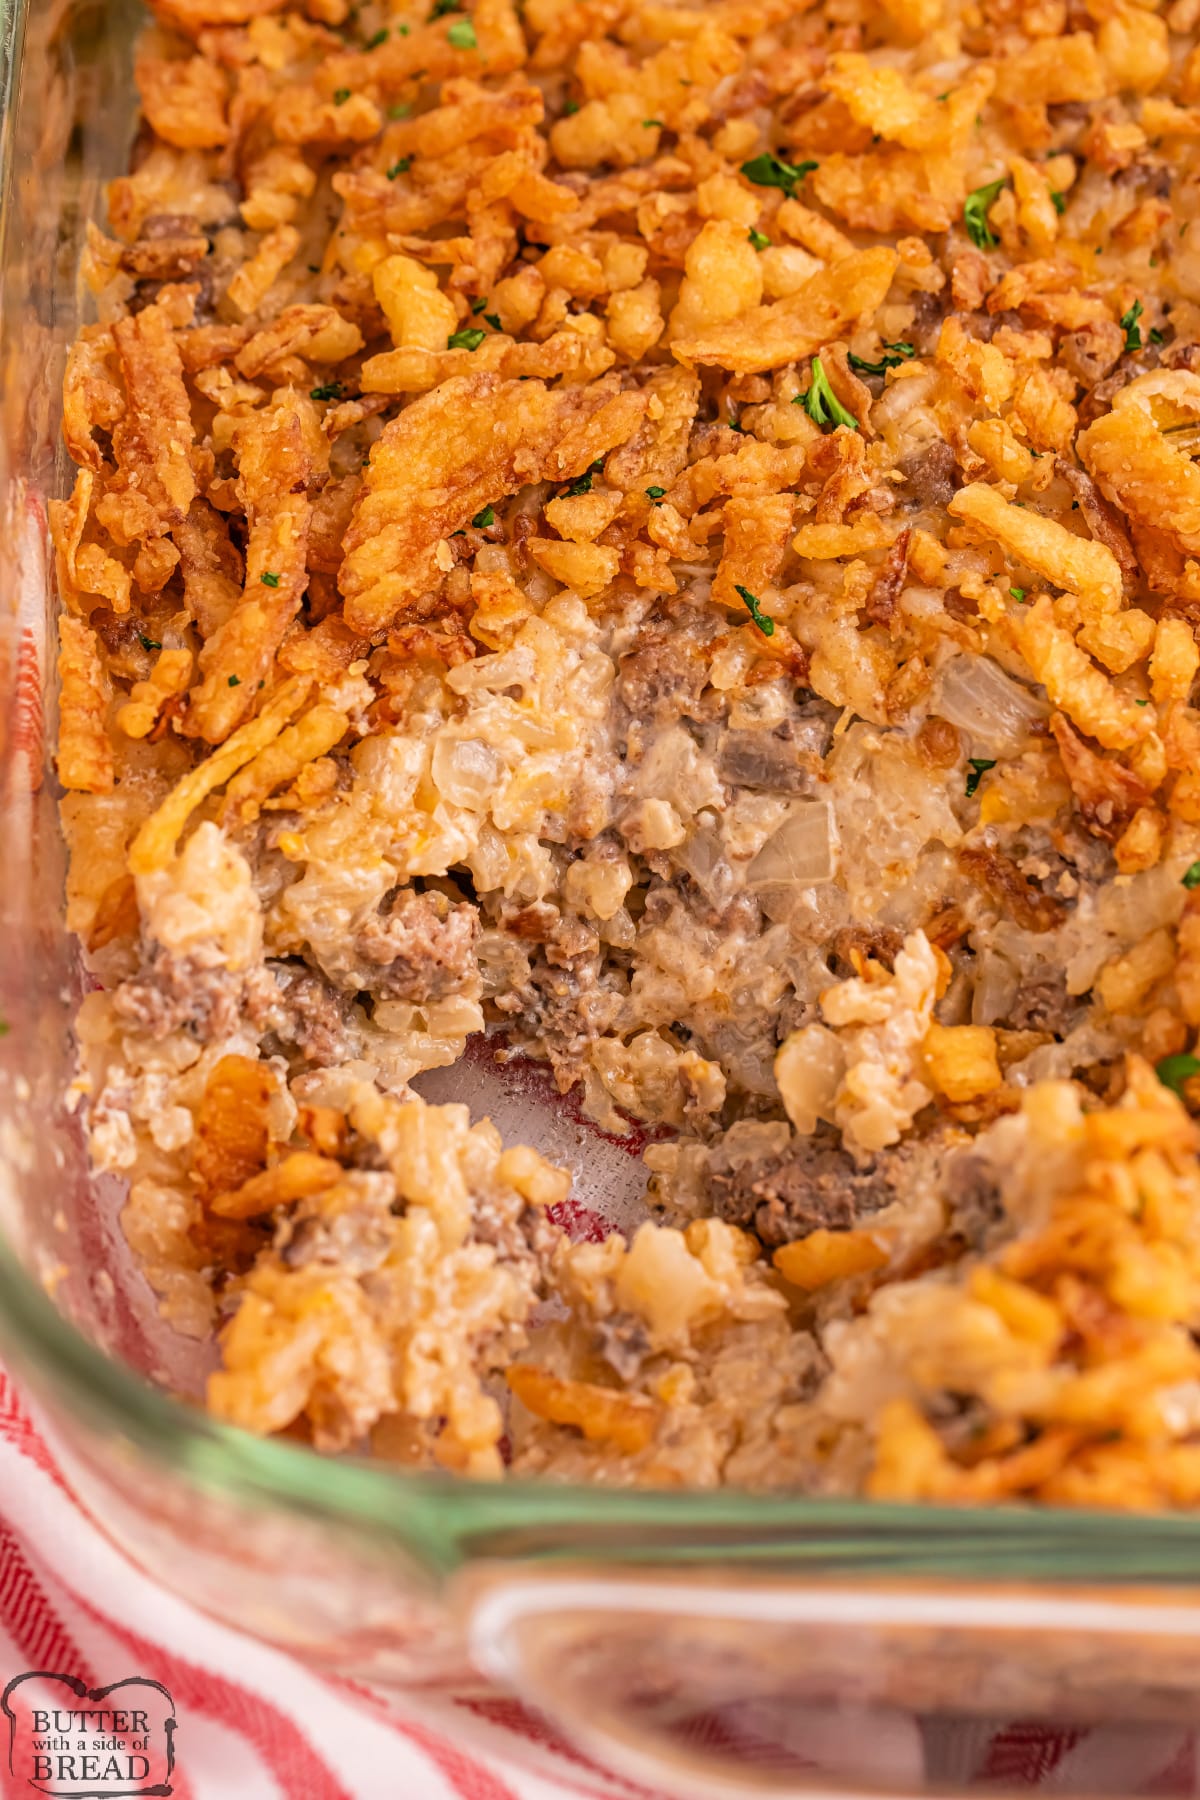 French Onion Beef Rice Casserole is the perfect weeknight dinner recipe. Delicious casserole recipe made with ground beef, rice, french onion soup mix, and topped with french fried onions.